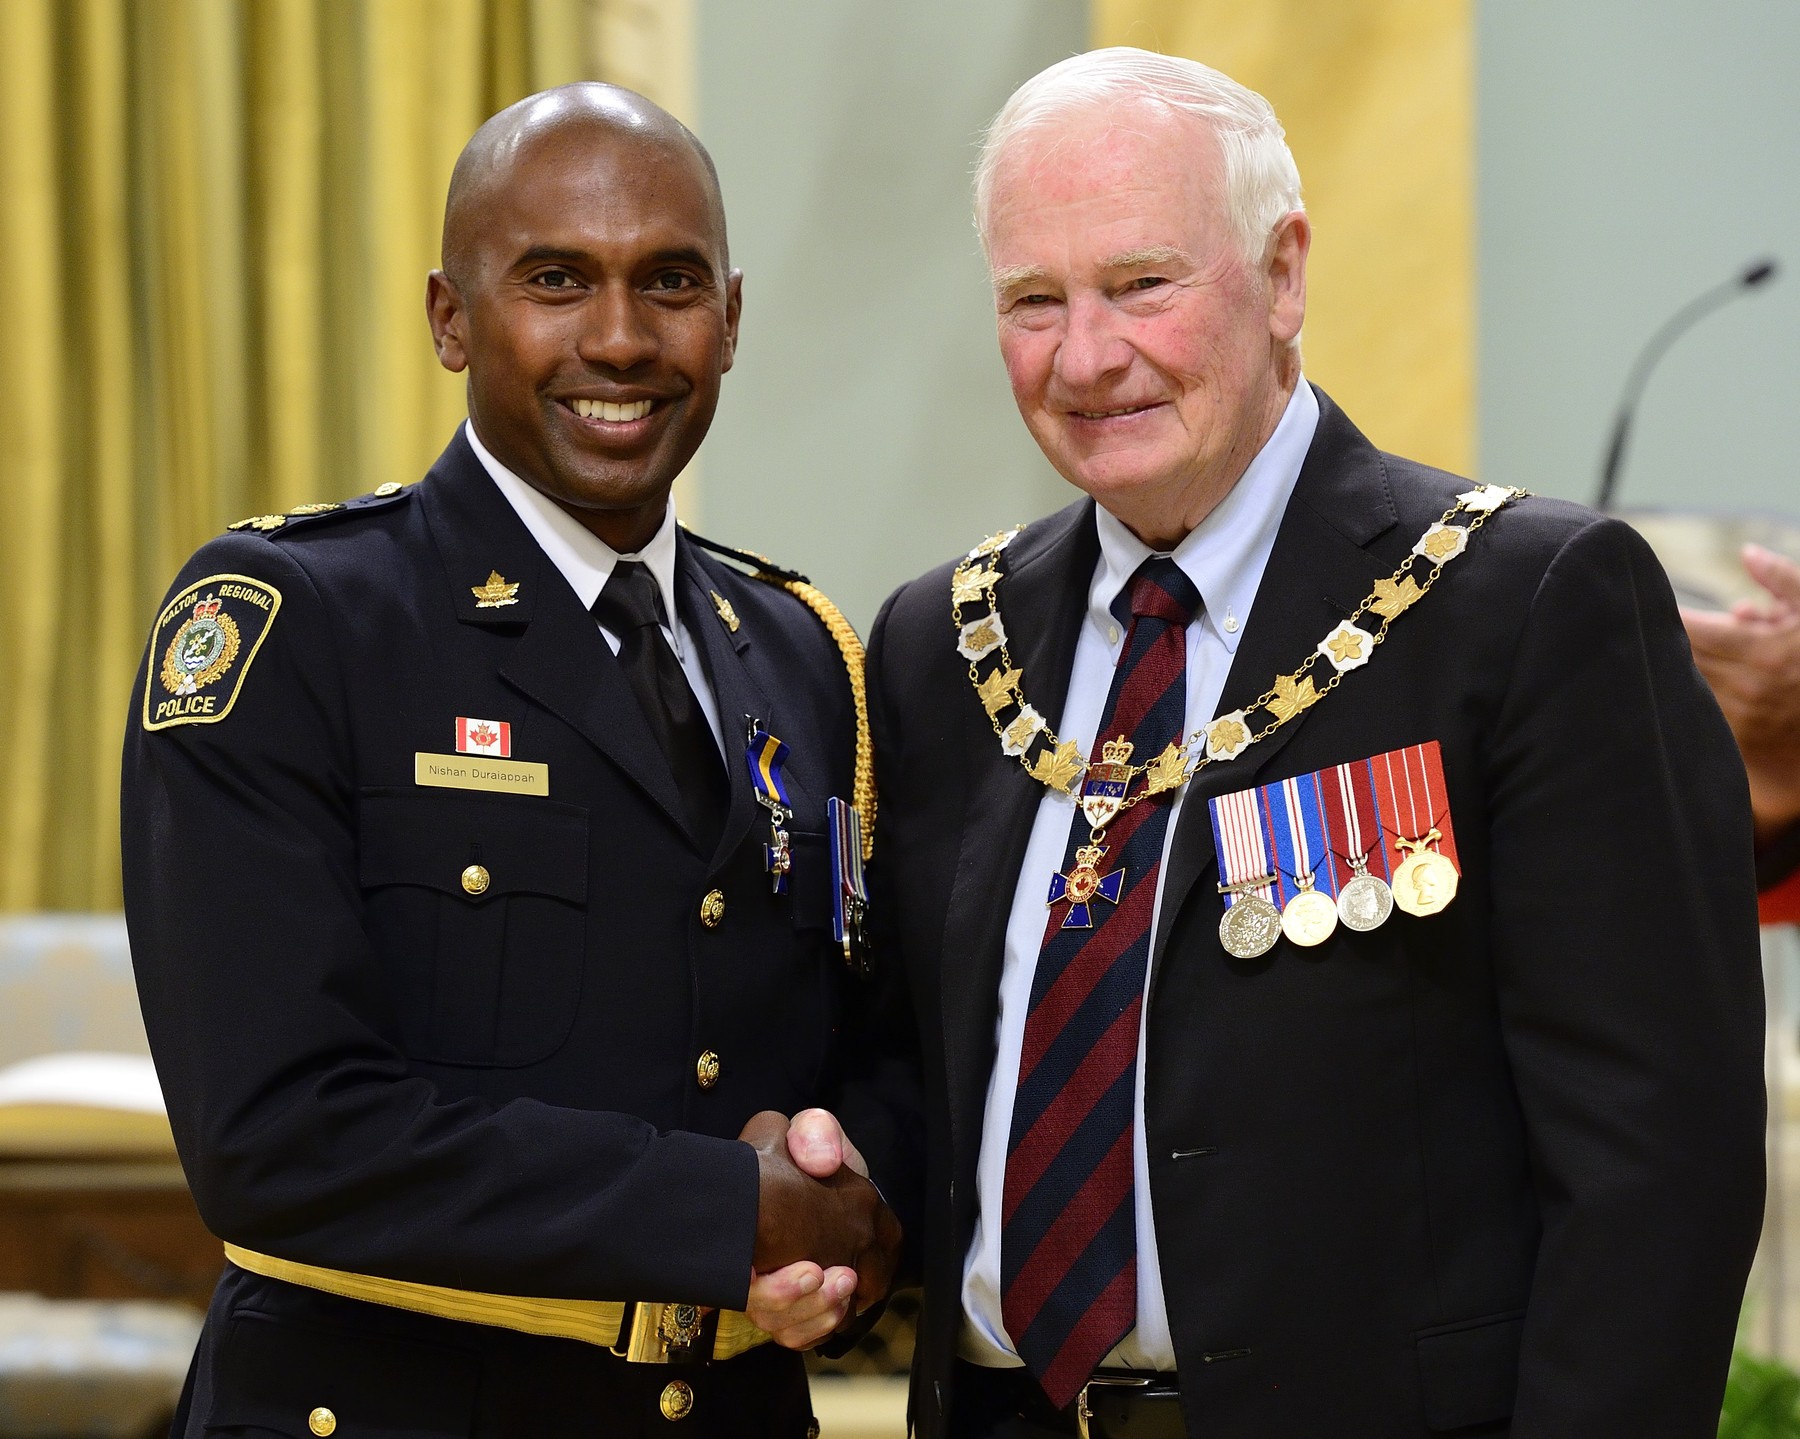 David Johnston, Deputy Chief Nishan J. Duraiappah | GG02-2016-0335-030
September 16, 2016
Ottawa, Ontario, Canada

His Excellency presents the Member (M.O.M.) insignia of the Order of Merit of the Police Forces to Deputy Chief Nishan J. Duraiappah, M.O.M.

His Excellency the Right Honourable David... | MCpl Vincent Carbonneau, Rideau Hall, OSGG